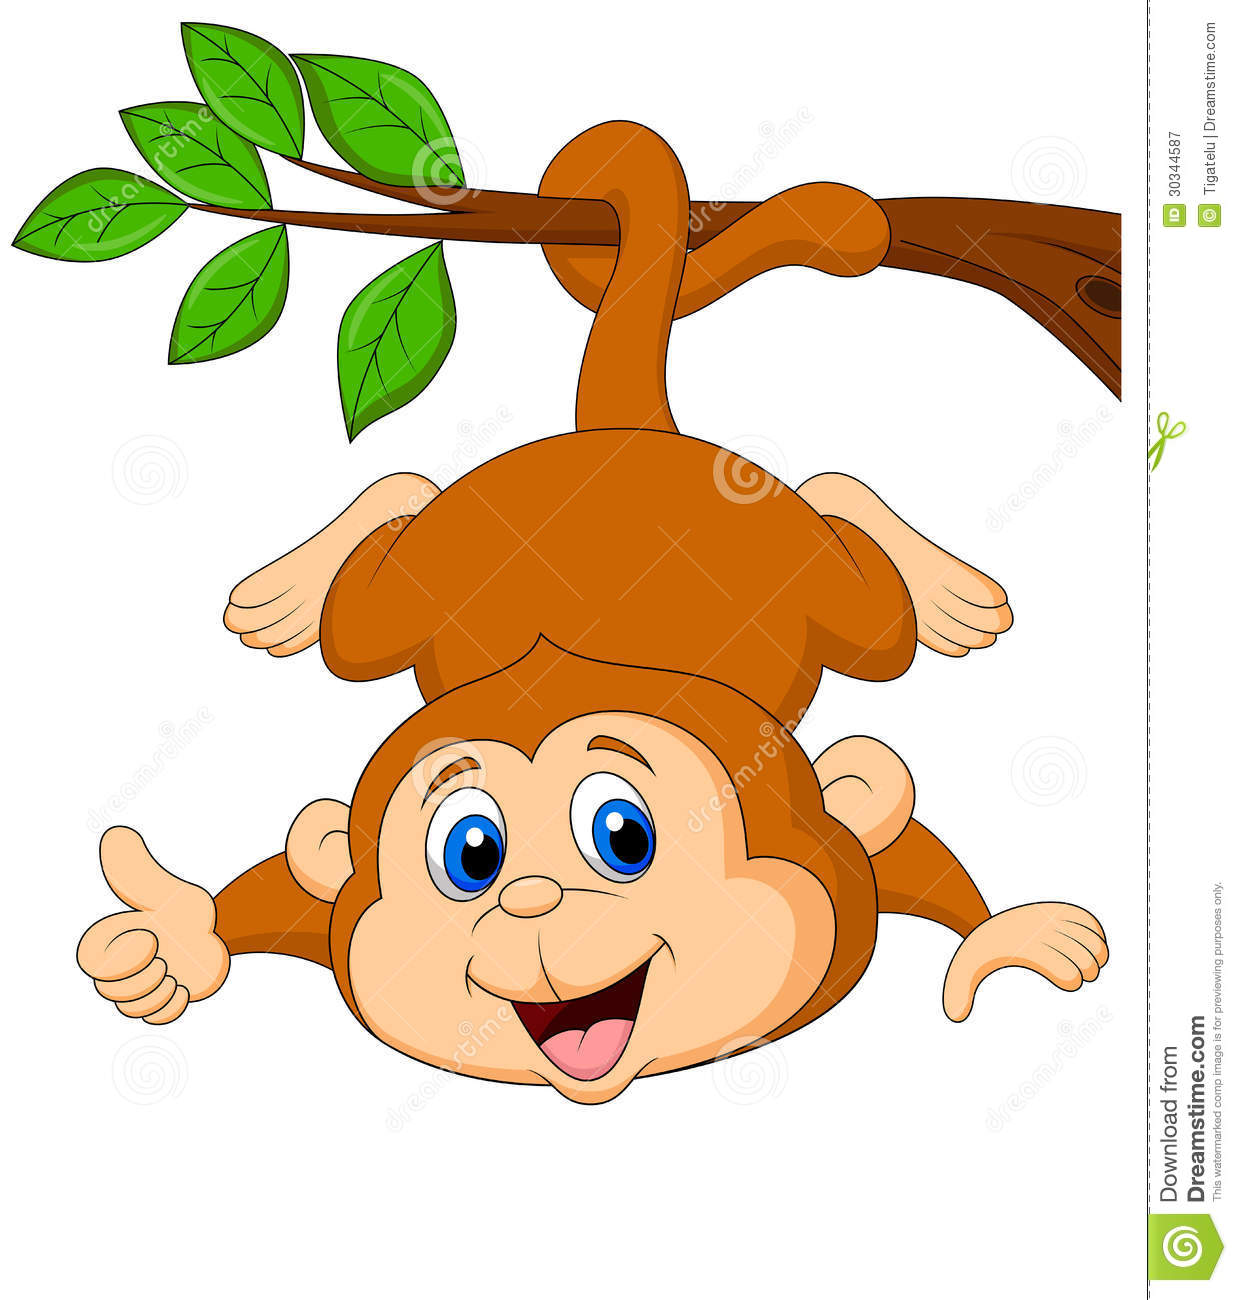 Monkey In A Tree Cartoon   Clipart Panda   Free Clipart Images